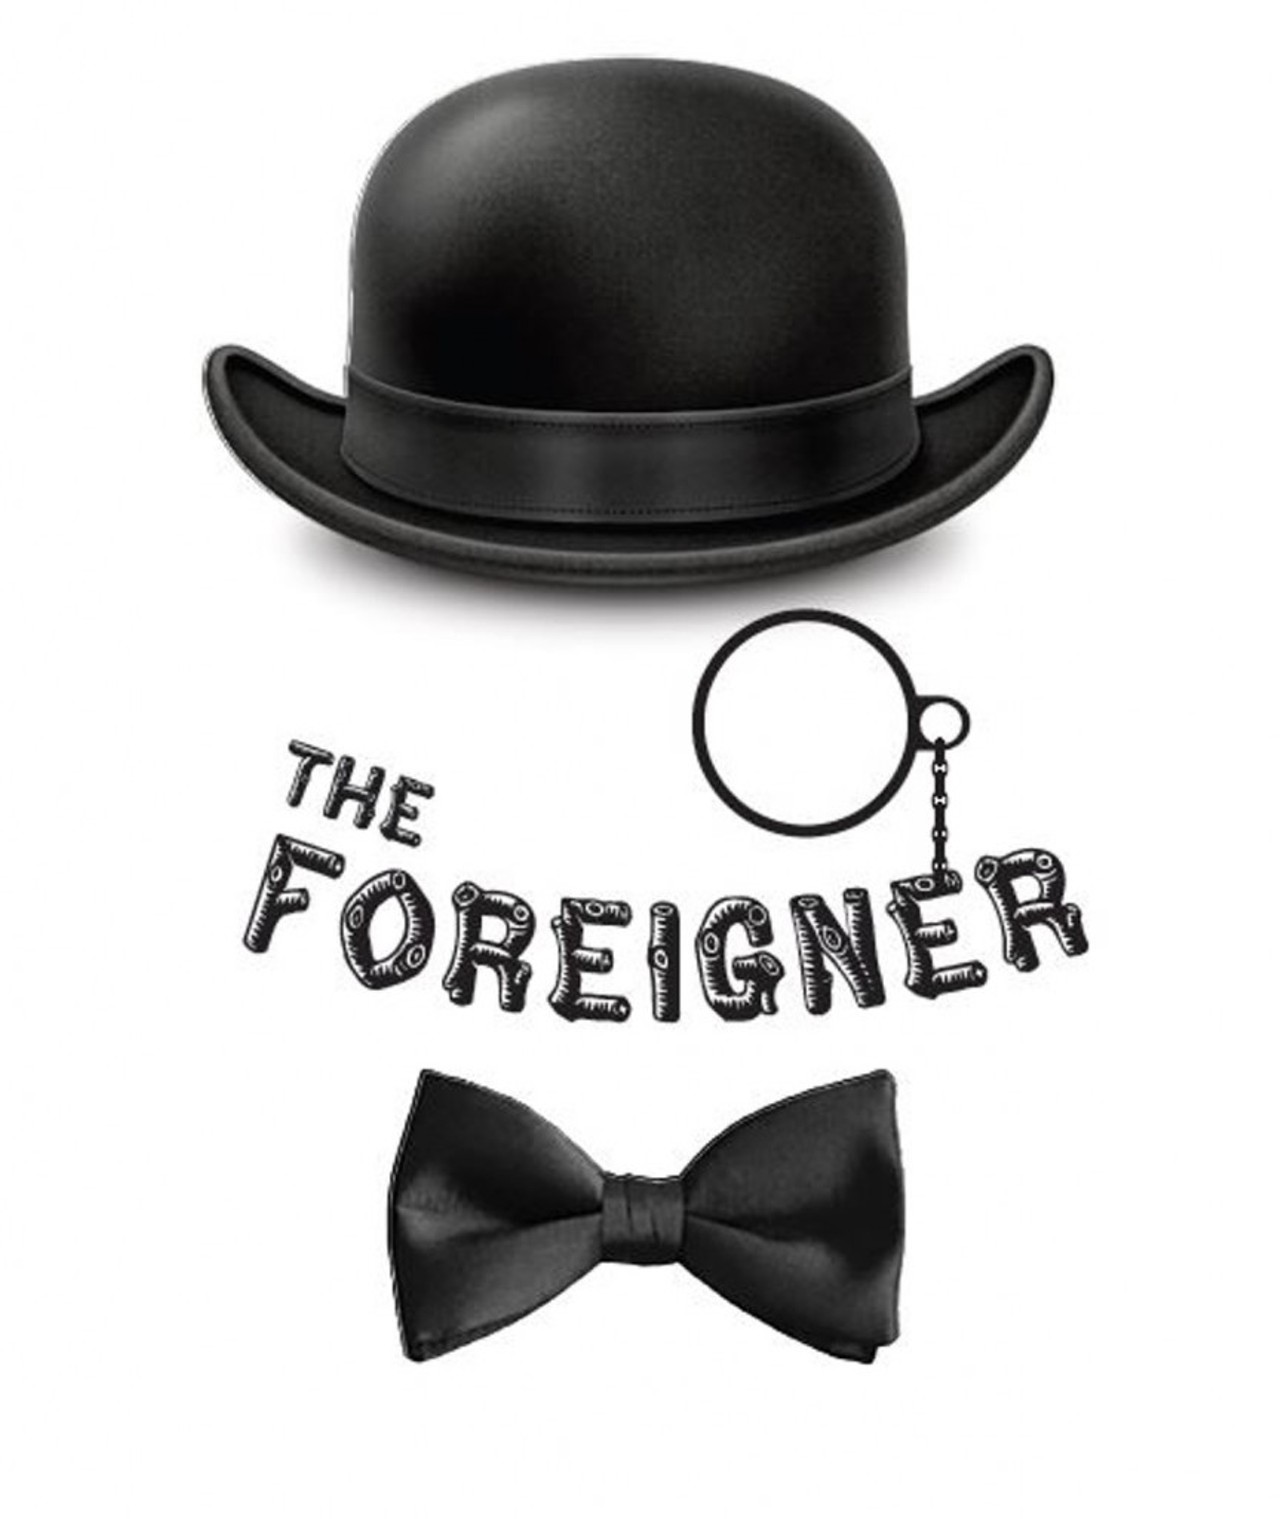 The Foreigner
7:30-10 p.m. Thur., Sept. 8; 8-10:30 p.m. Sat. Sept. 10 and 2:30-5 p.m. Sun. Sept. 11 (last day at Sheldon Vexler Theatre, 12500 N.W. Military
Likened by theater critic Ben Brantley to &#147;Beverly Hillbillies or  Green Acres episode with a social conscience,&#148; The Foreigner is one of two enduring farces left behind by Larry Shue, a playwright and actor who died in a 1985 plane crash at age 39. For more info, vexler.org